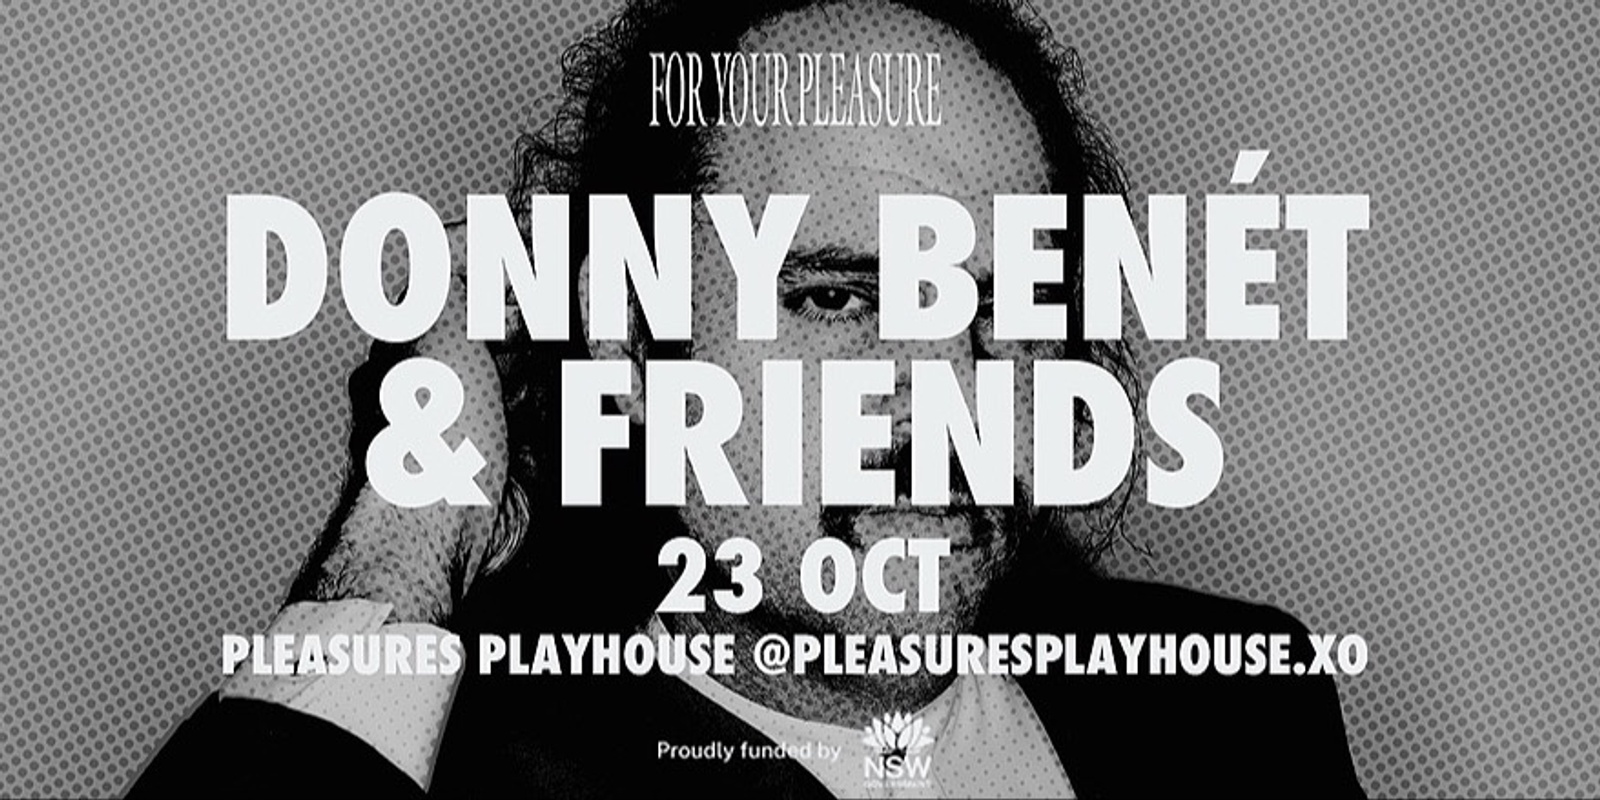 Banner image for DONNY BENET & FRIENDS PARTY @PLEASURES PLAYHOUSE